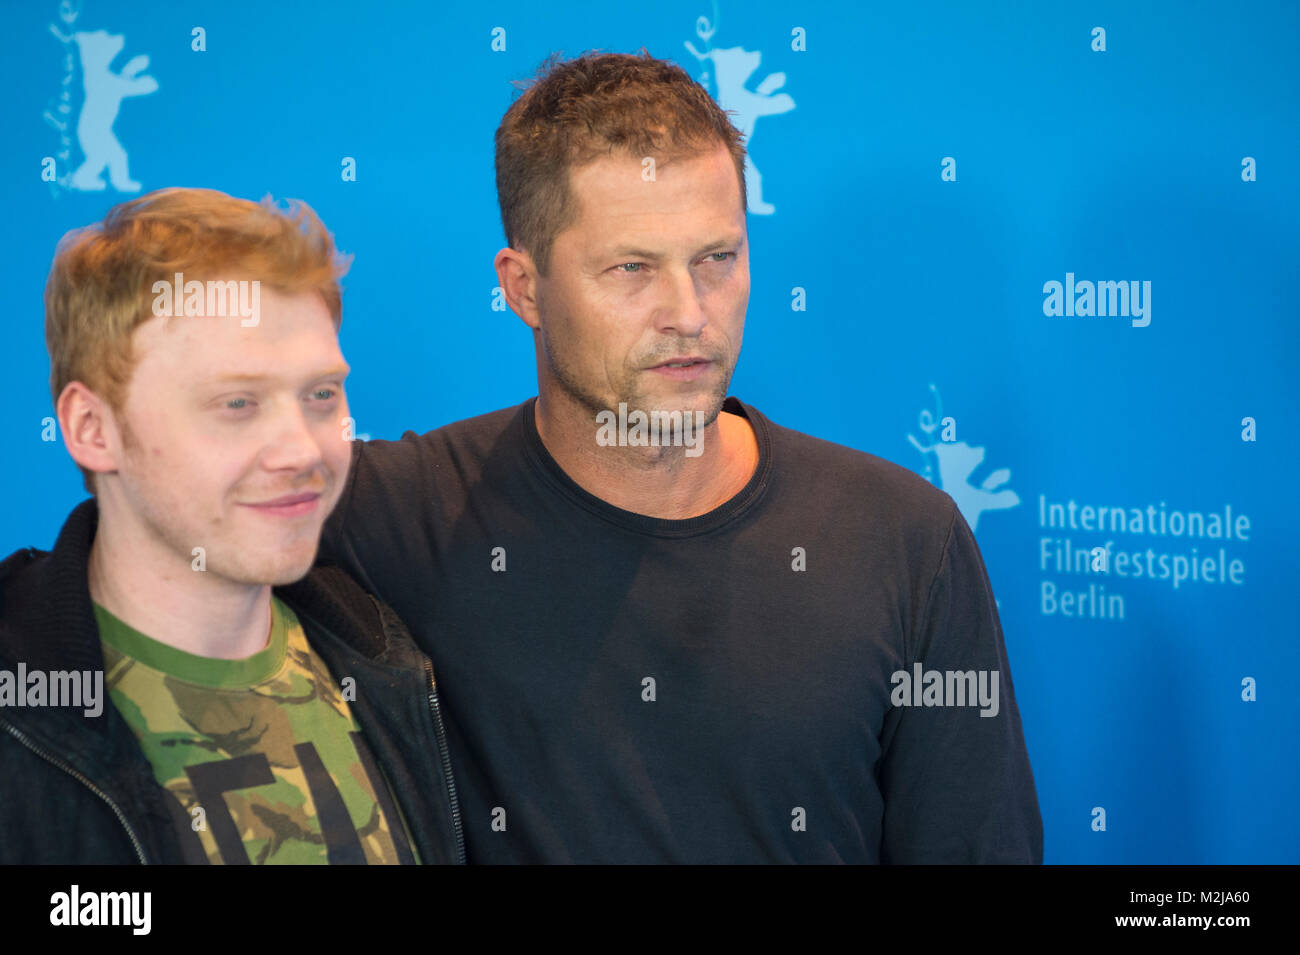 63rd Berlinale: International Film Festival in Berlin, with Fredrick Bond movie, “The necessary Death of Charlie Countryman” the actors of the movie are Shia LaBeouf, Til Schweiger and produced by Rupert Grint. (L to R) Til Schweiger, Rupert Grint, Stock Photo